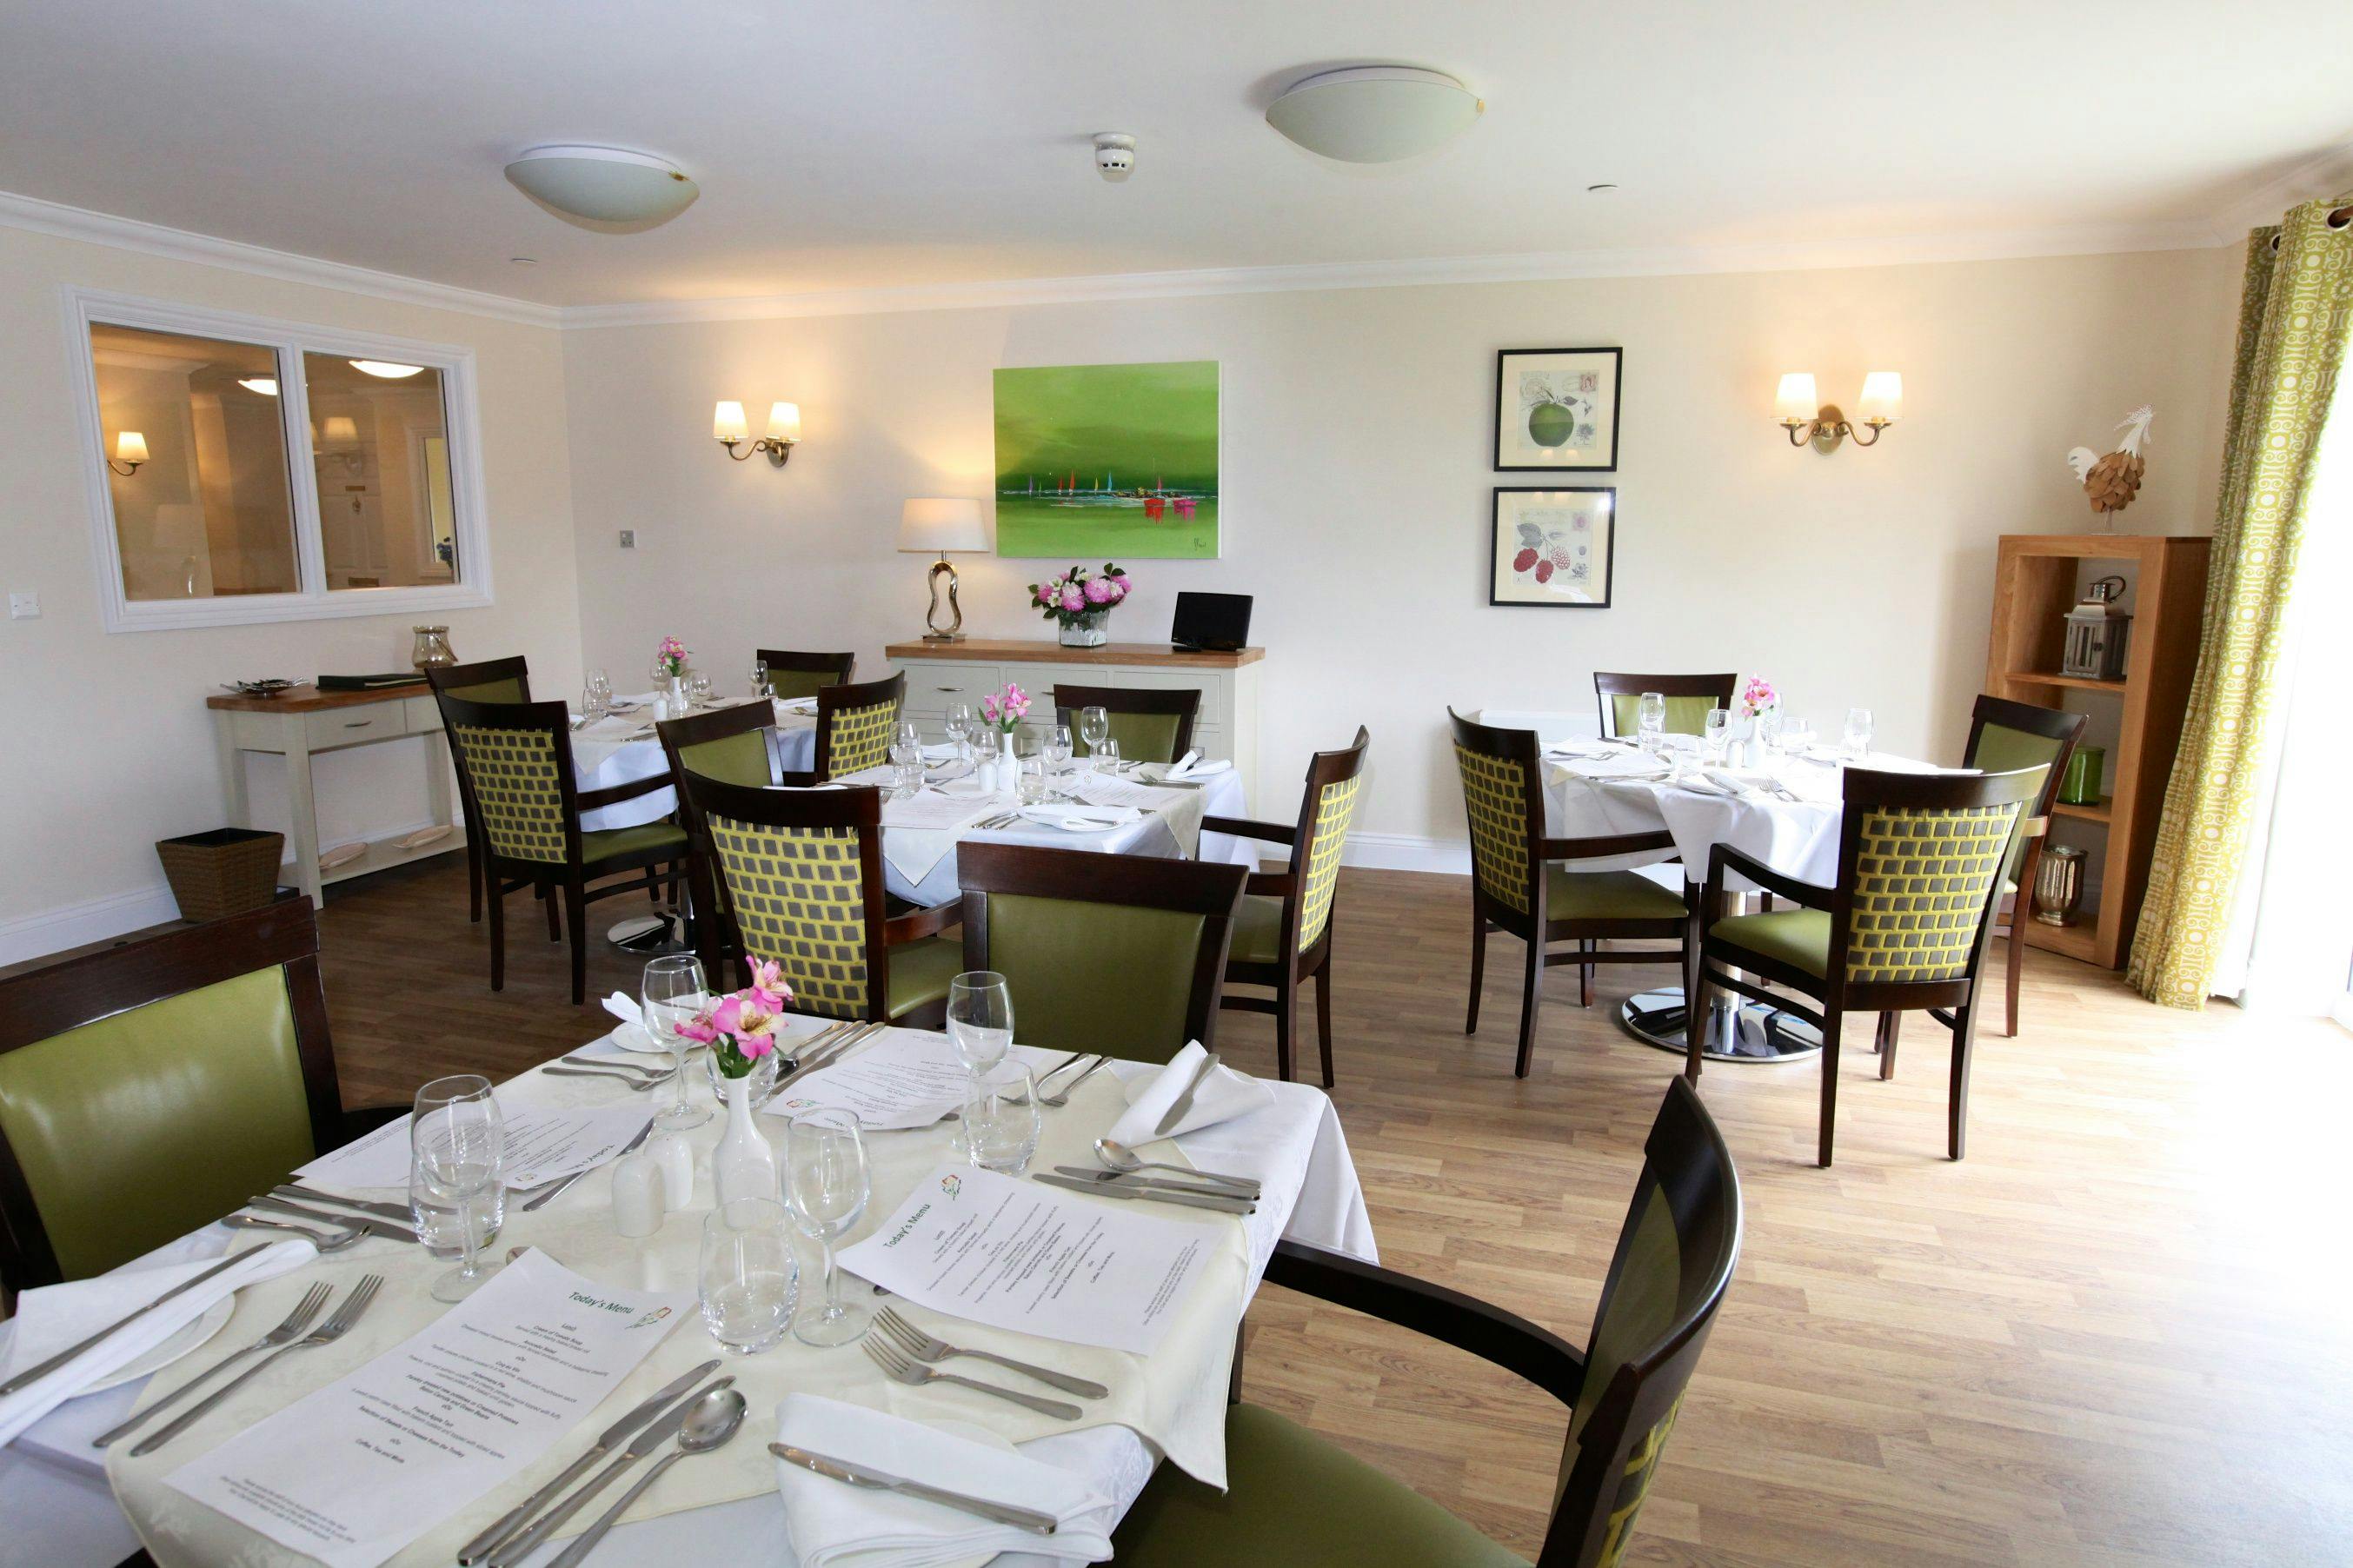 Dining room of Bryn Ivor Lodge care home in Newport, Cardiff